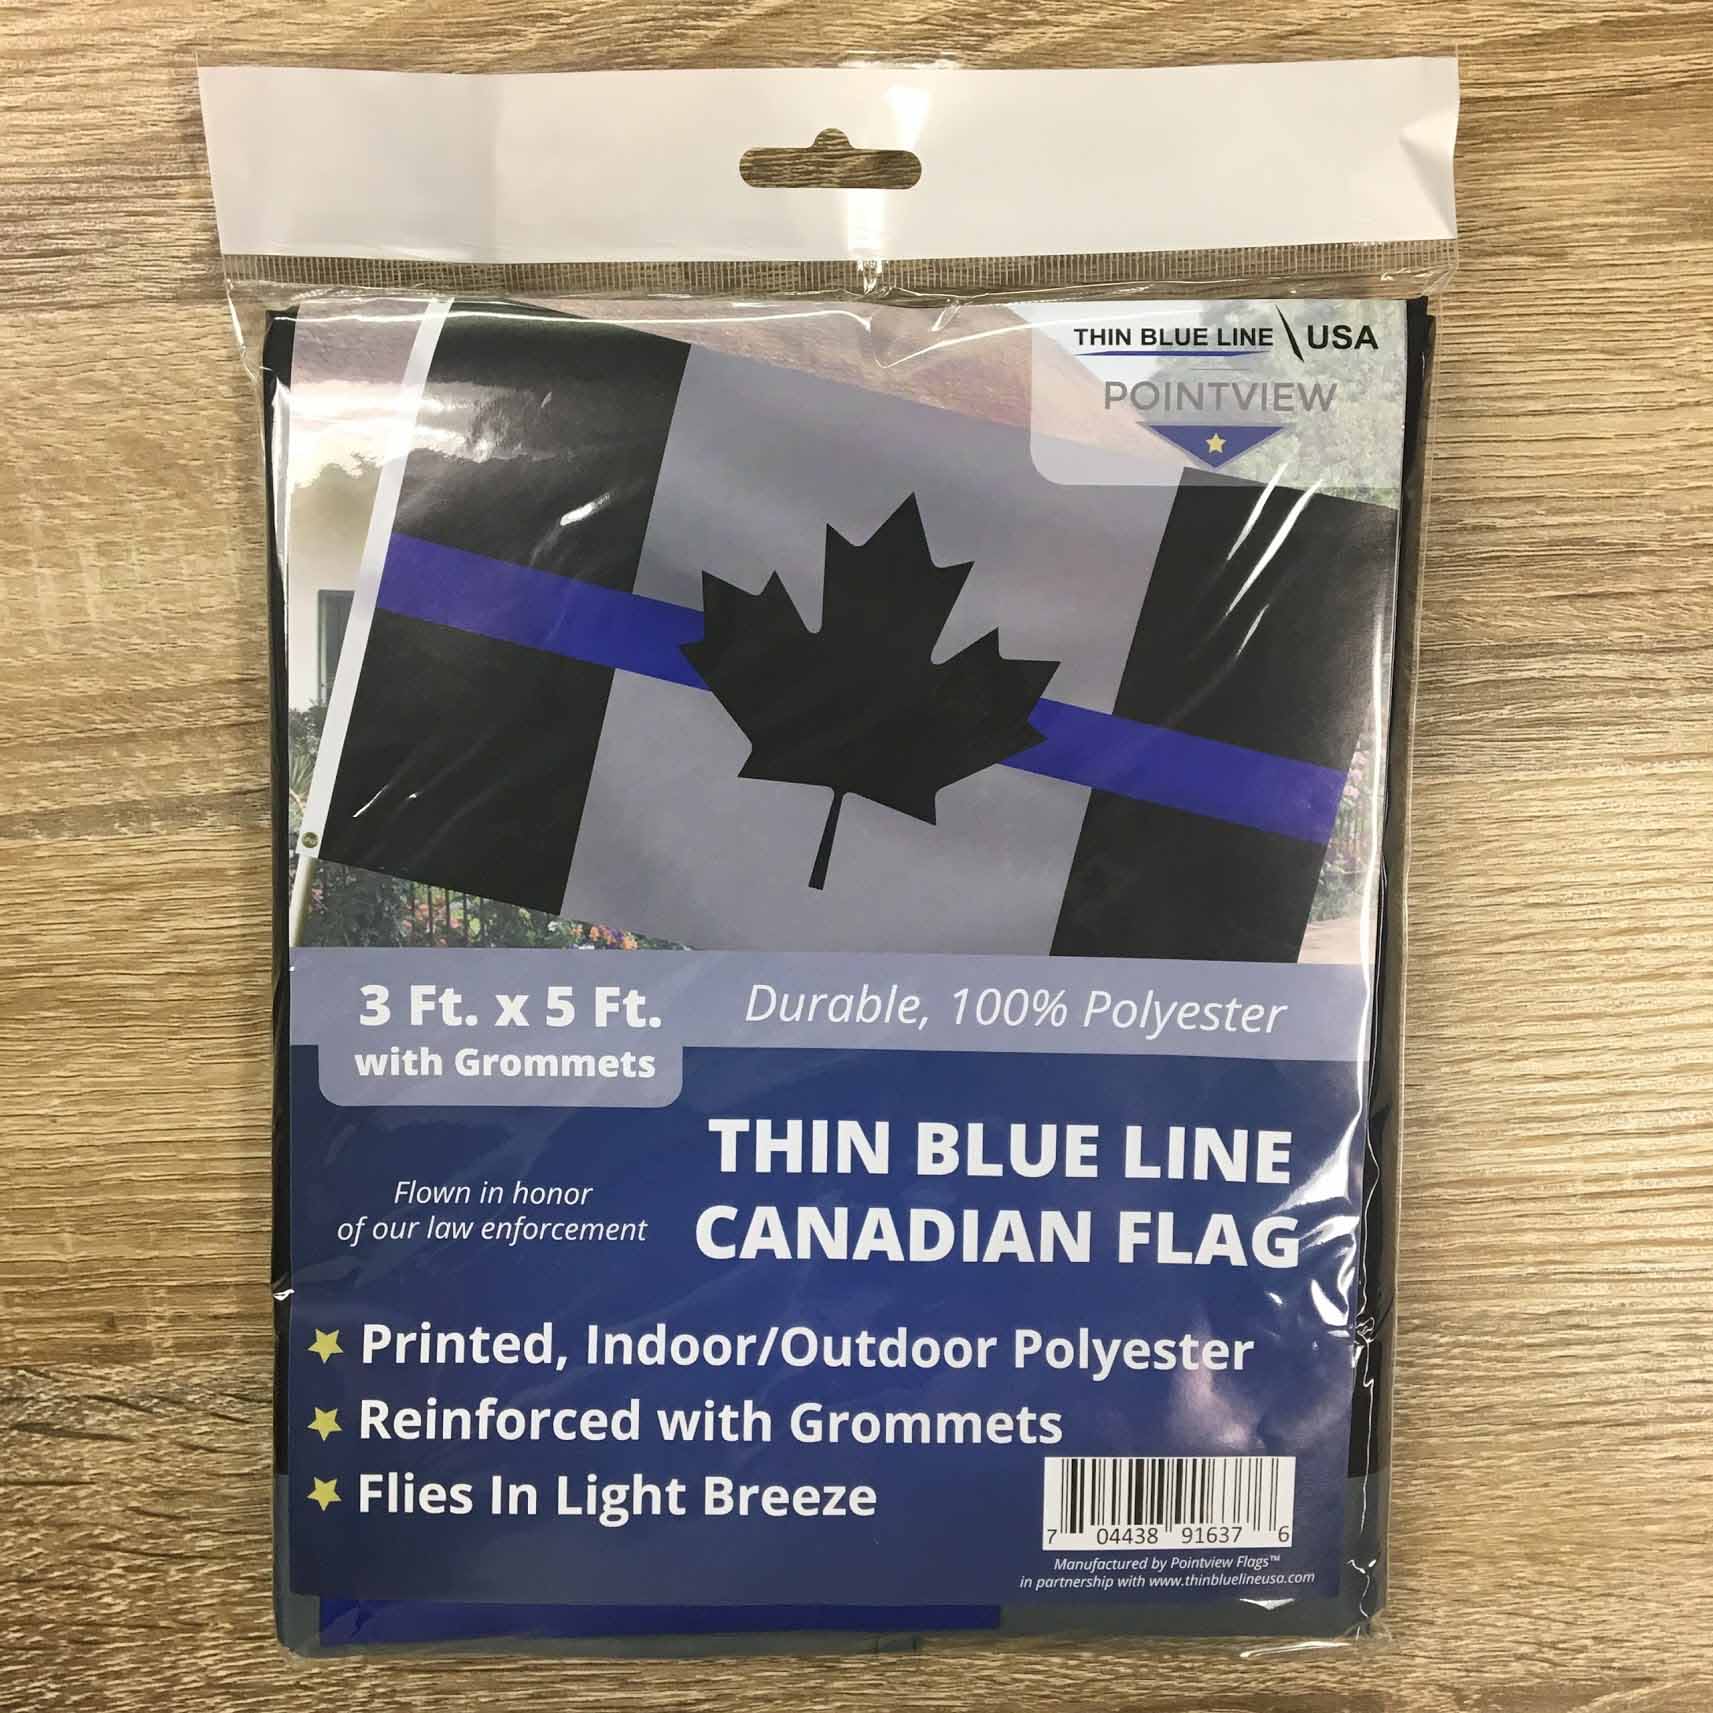 Thin Blue Line Canadian Flag 3 x 5 ft